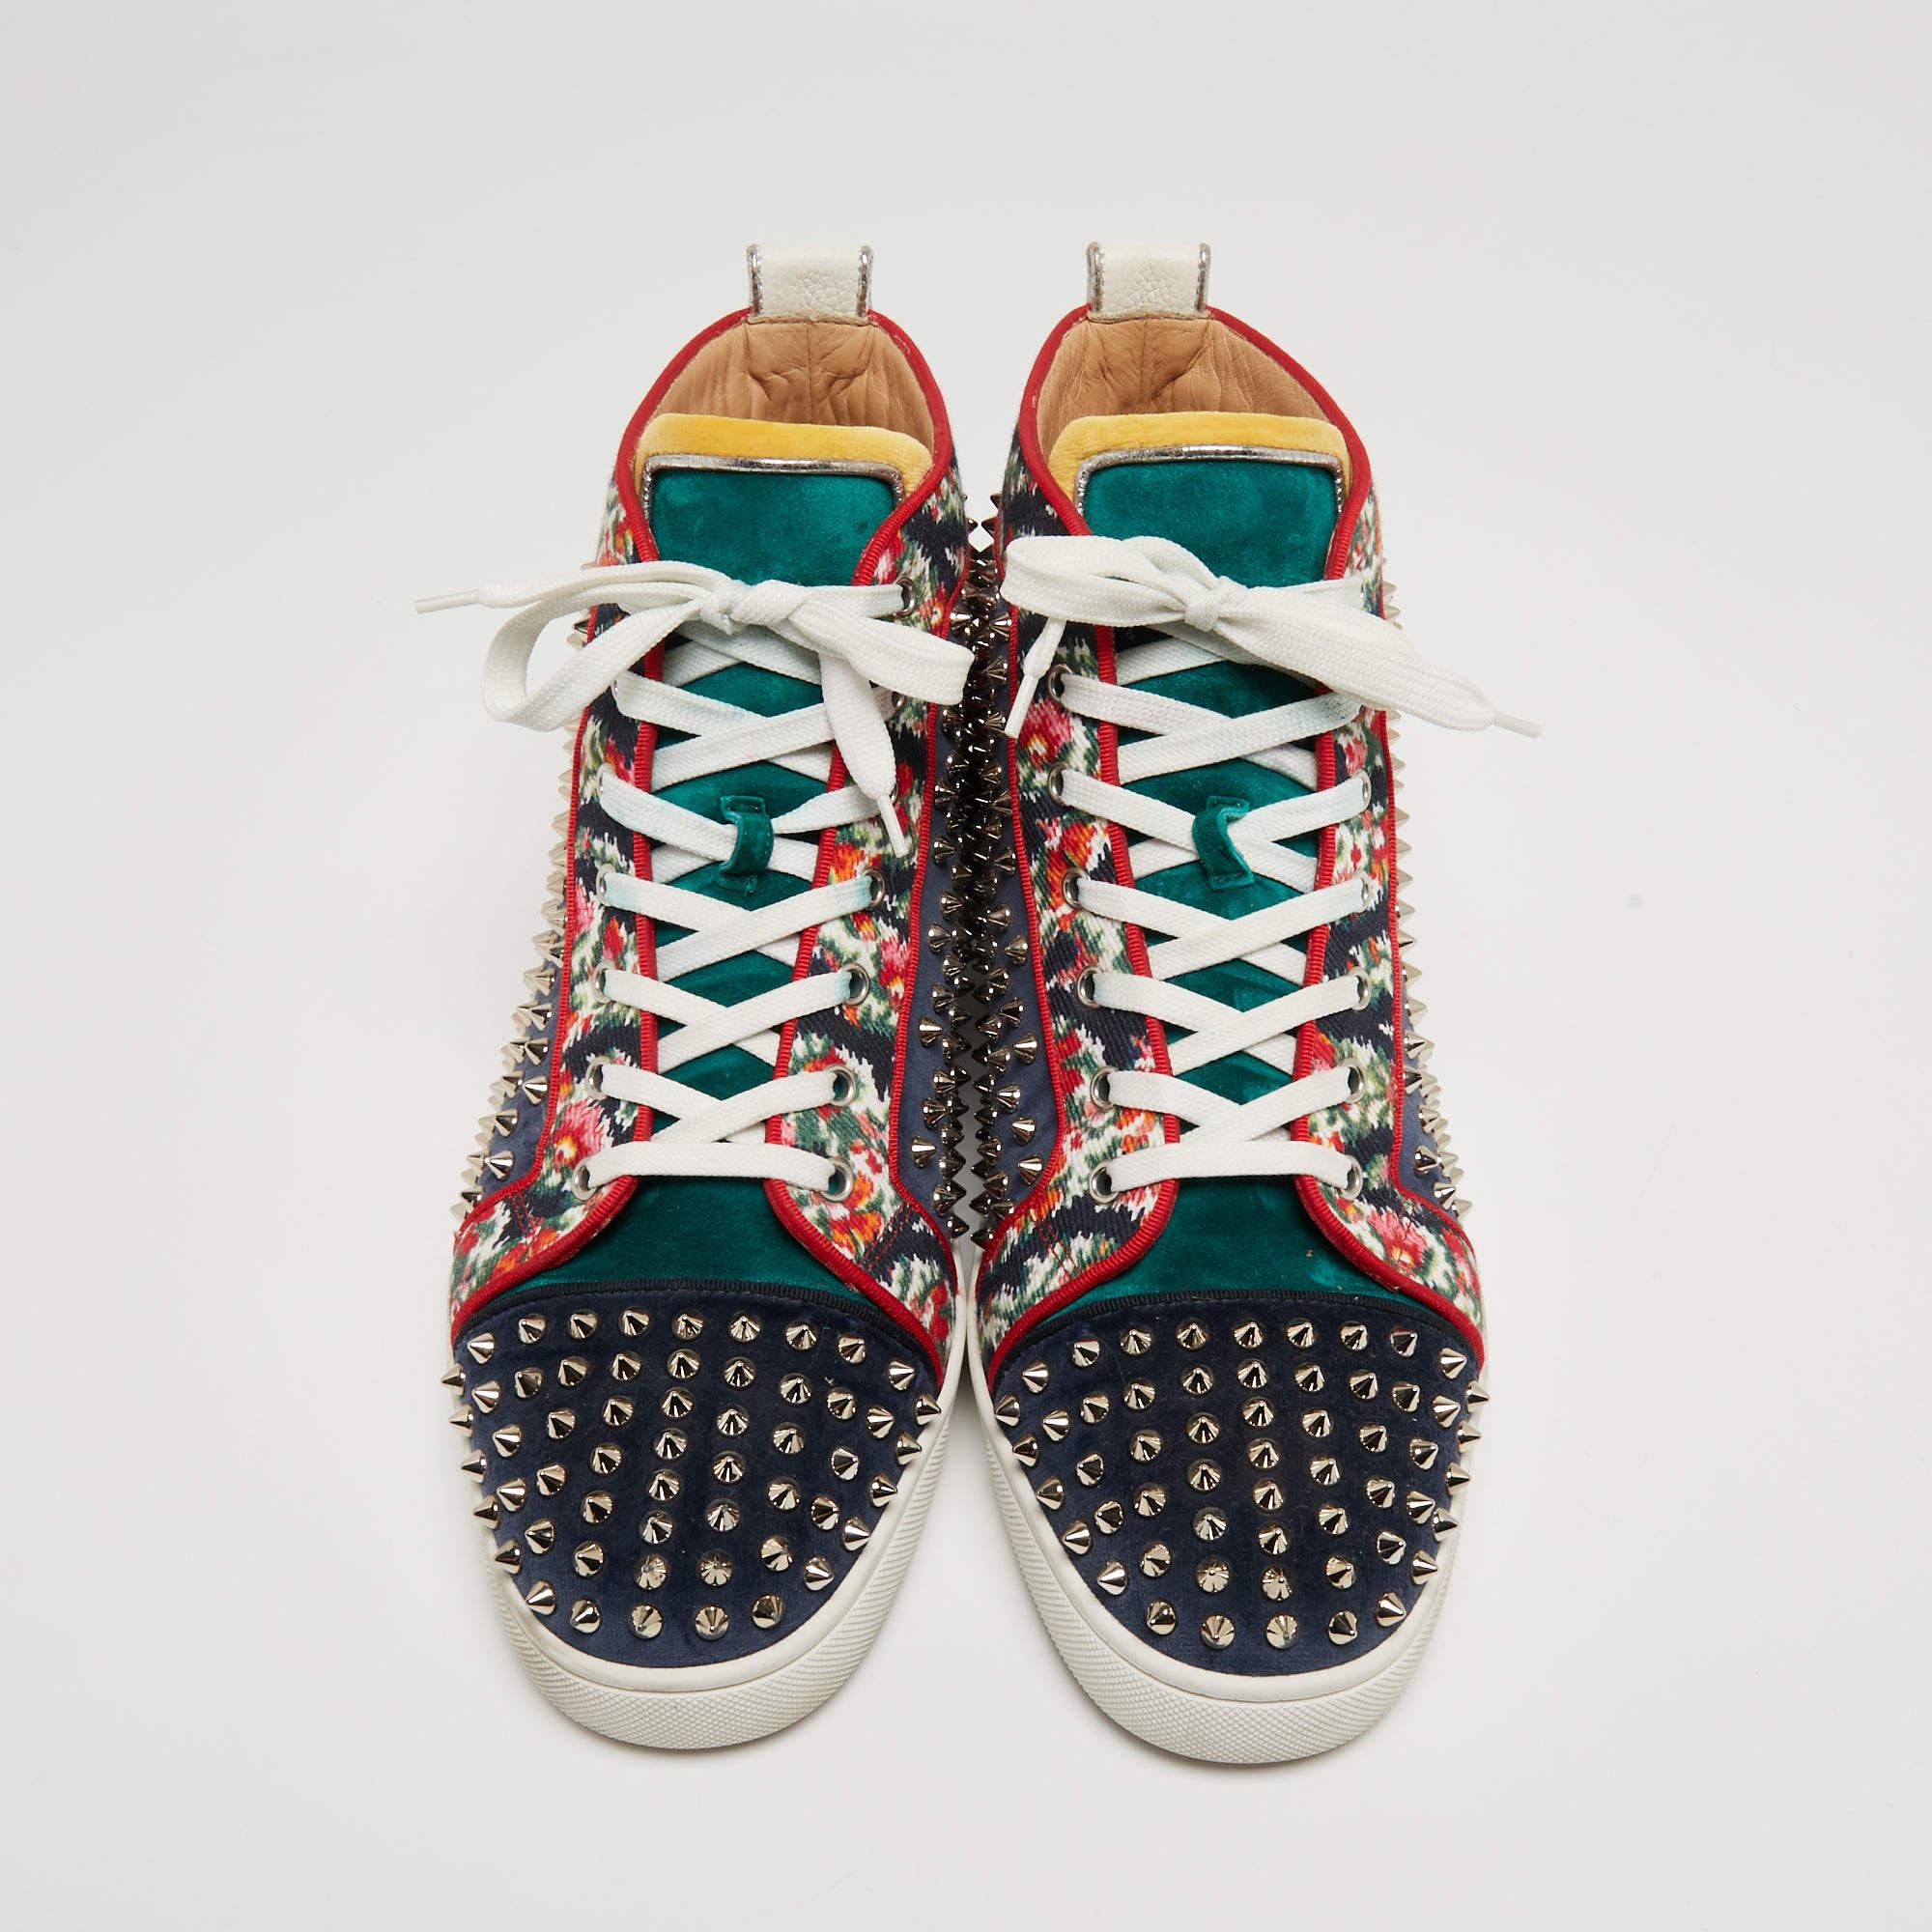 Men's Christian Louboutin Tricolor Leather and Fabric Louis Spikes High-Top Sneakers S